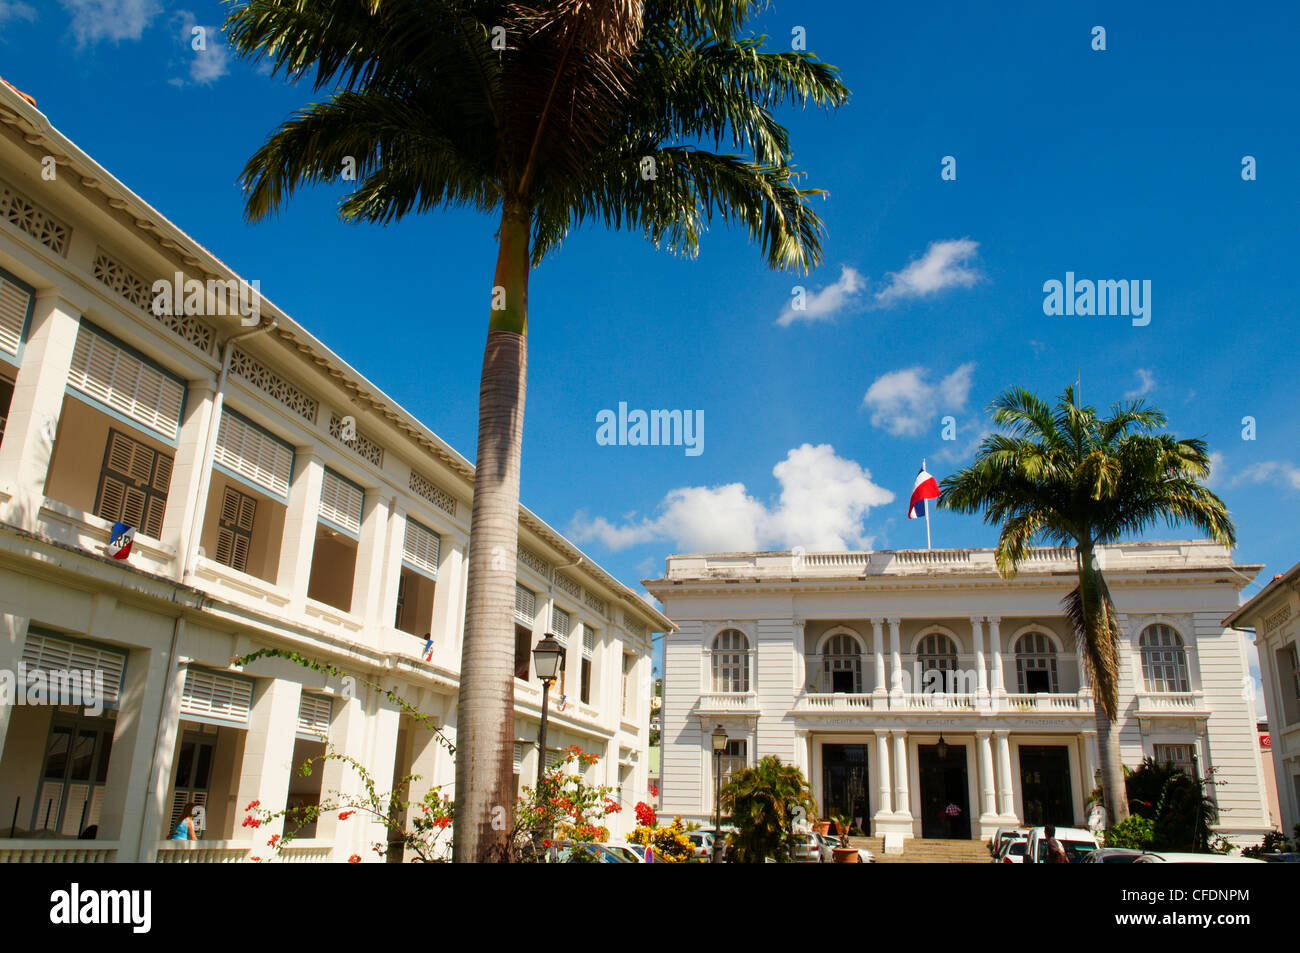 City hall, Fort-de-France, Martinique, French Overseas Department, Windward Islands, West Indies, Caribbean, Central America Stock Photo